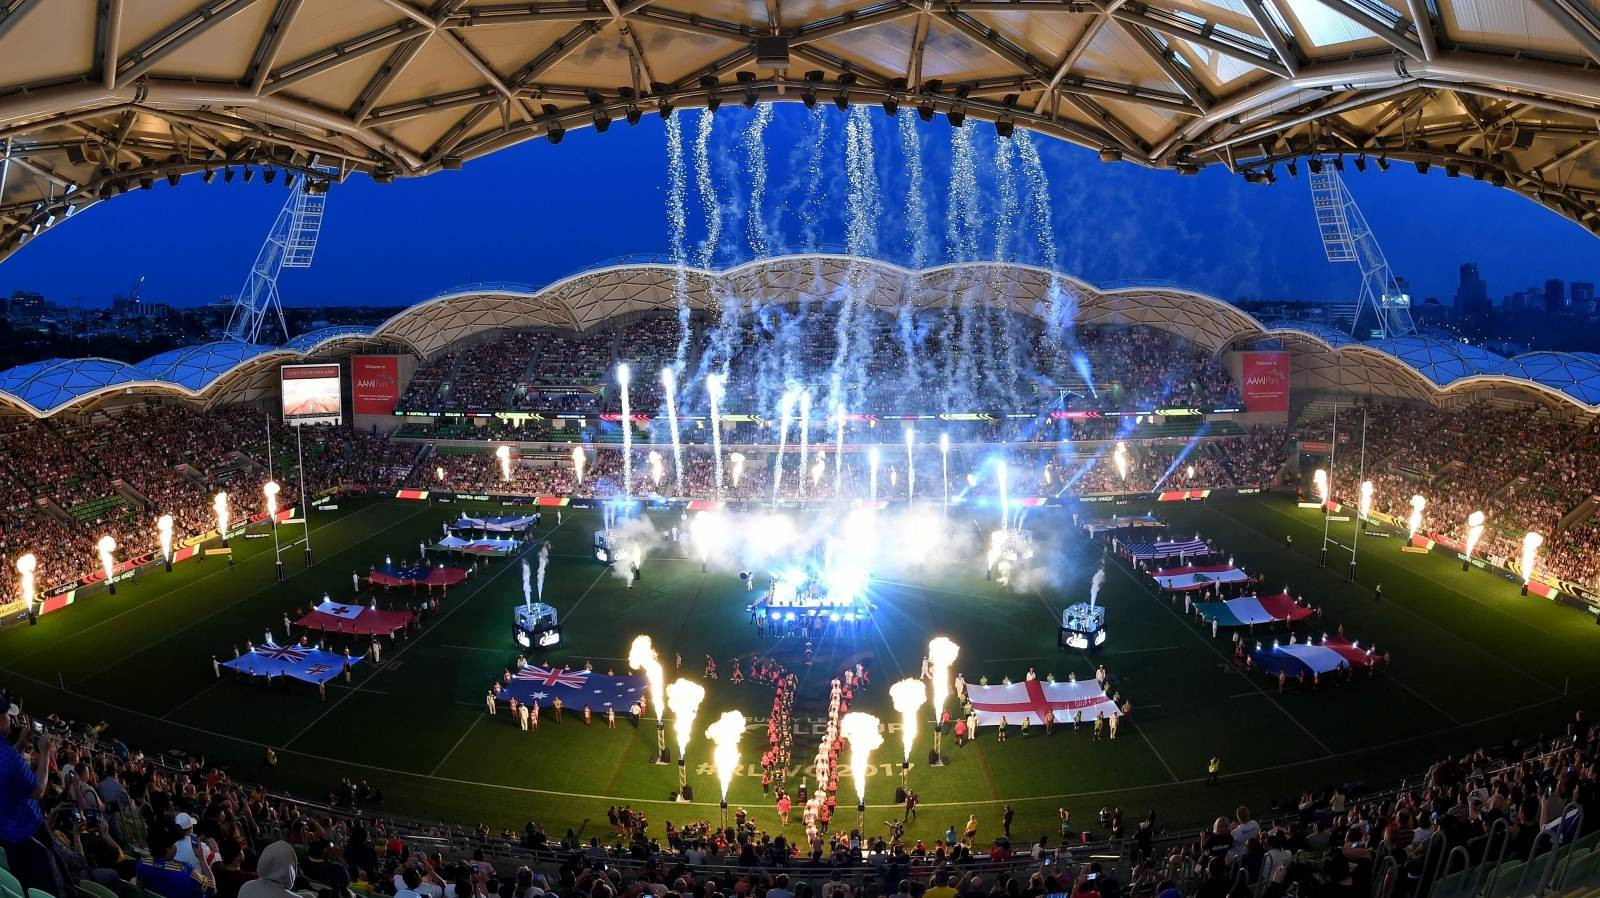 The 2021 Rugby League World Cup has announced its legacy programme "Inspired by 2021" to try and get more people into the sport ©RLWC